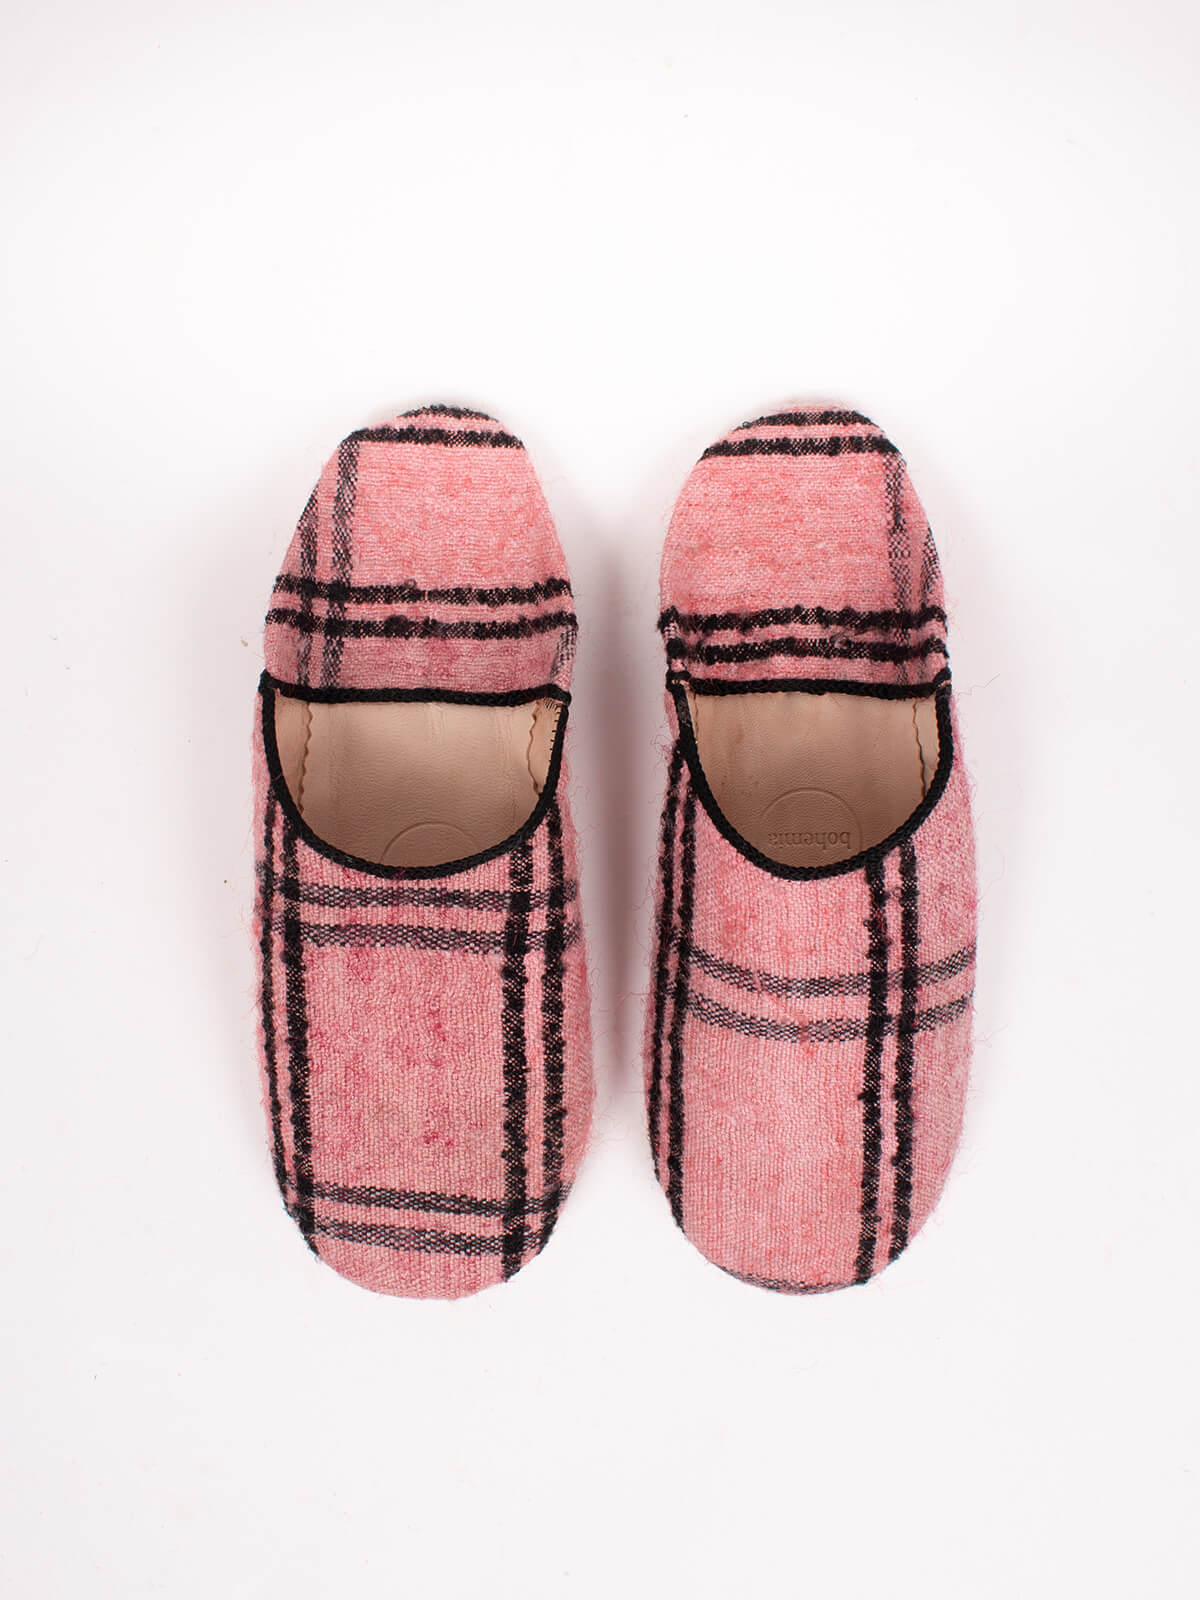 Moroccan Boujad Basic Babouche Slippers, Vintage Rose Check